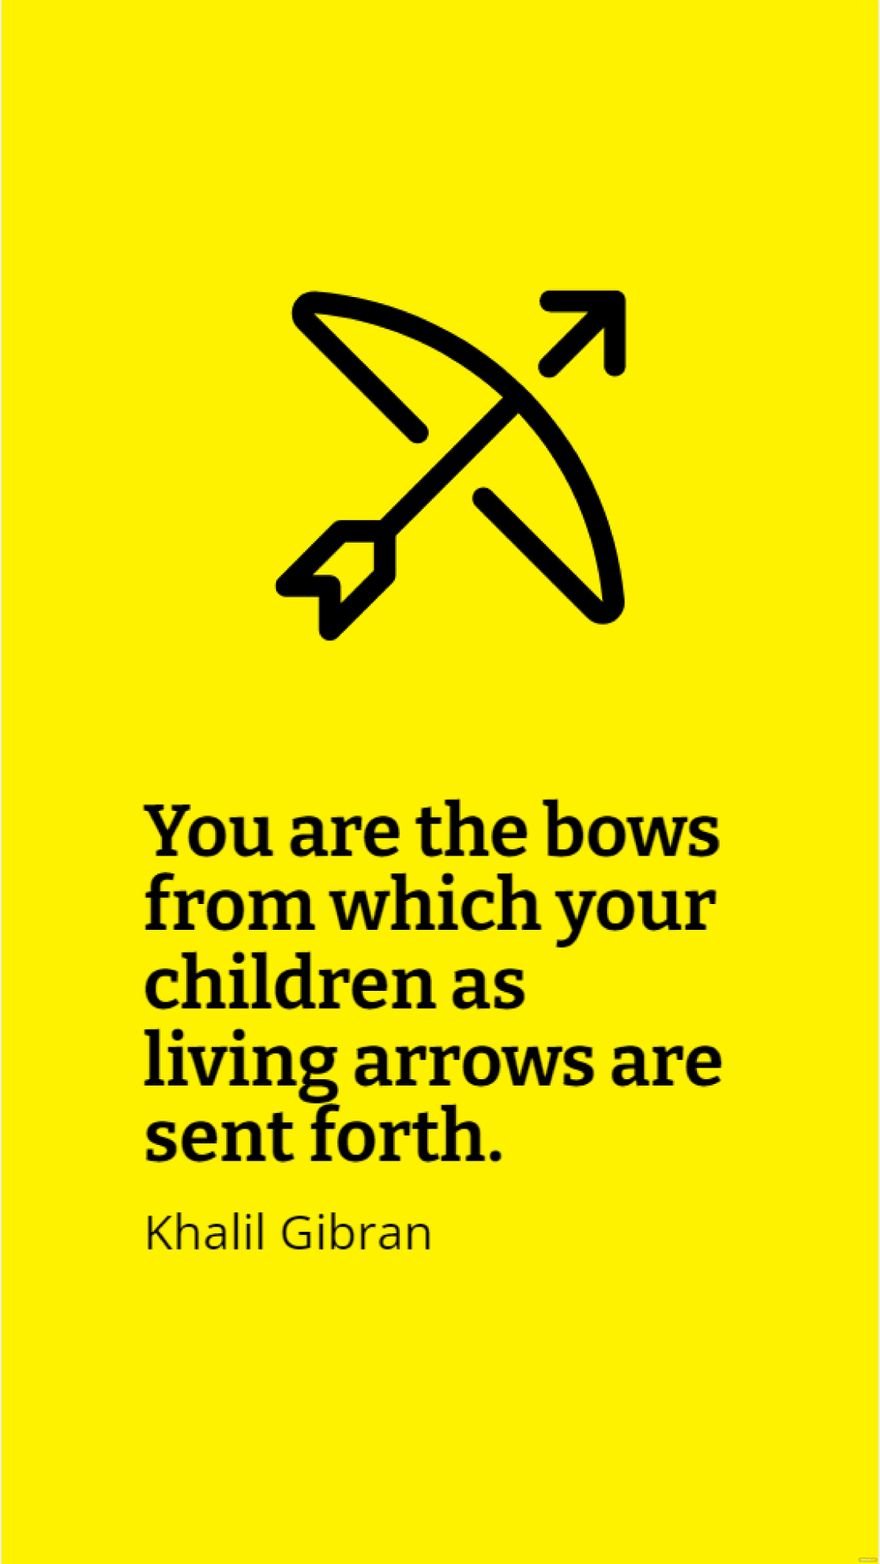 Khalil Gibran - You are the bows from which your children as living arrows are sent forth.